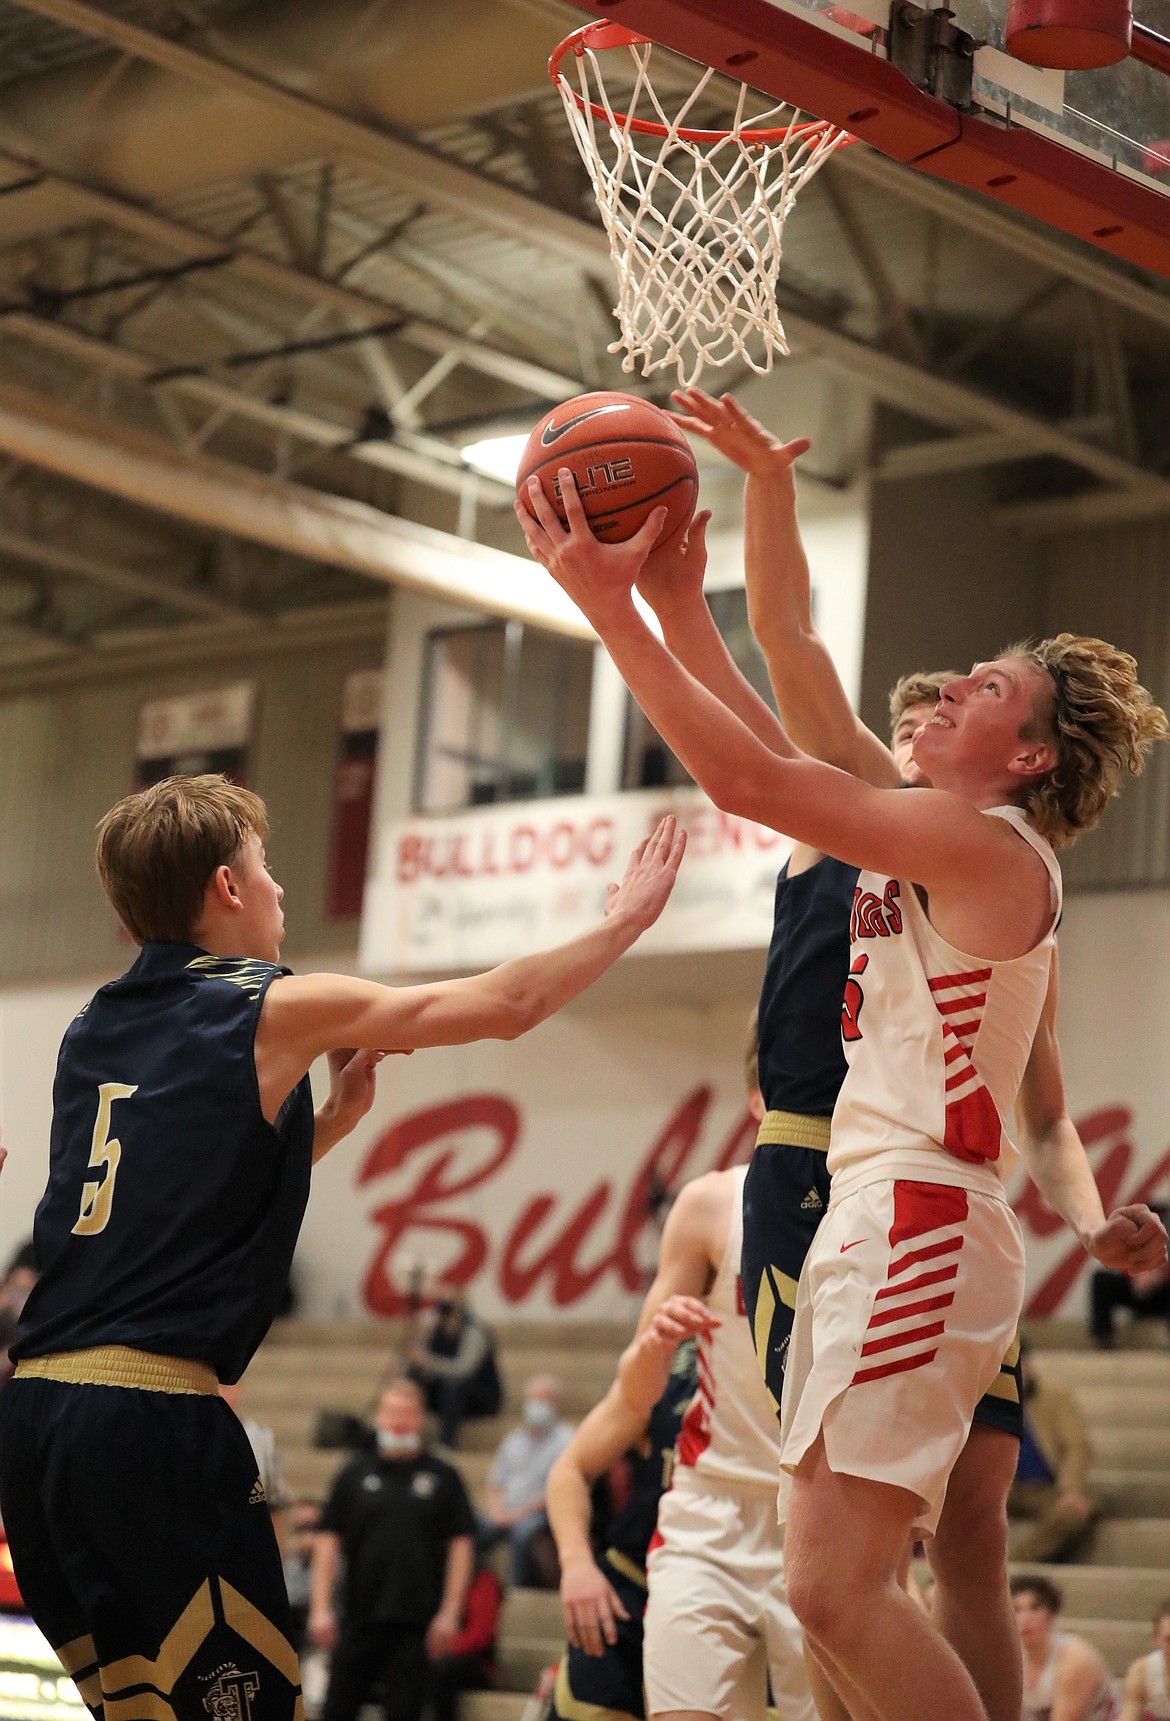 Jacob Eldridge attempts to hit a contested layup during the second half of Thursday's game.